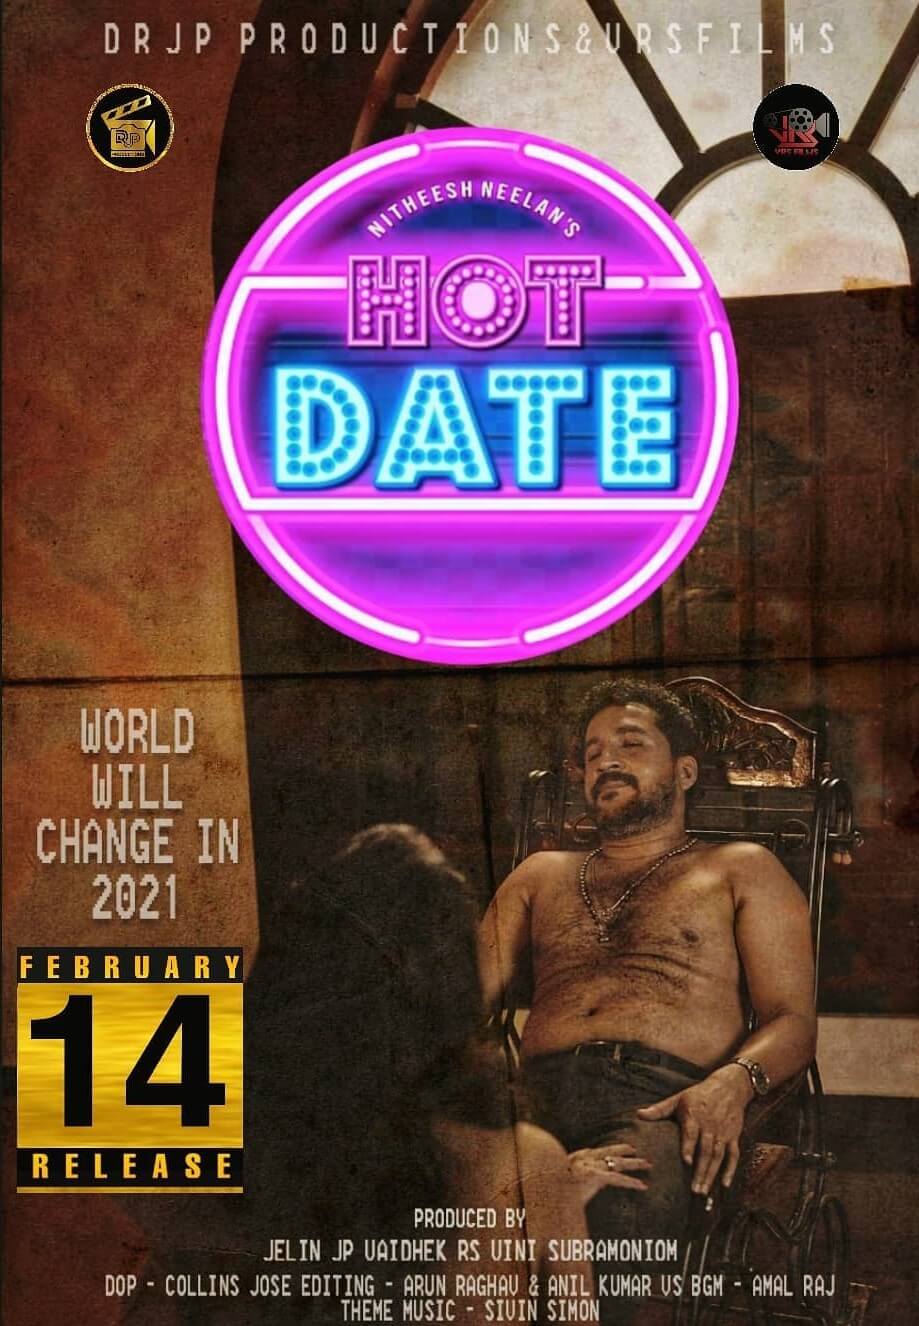 Hot Date Short Film from DRJP Production